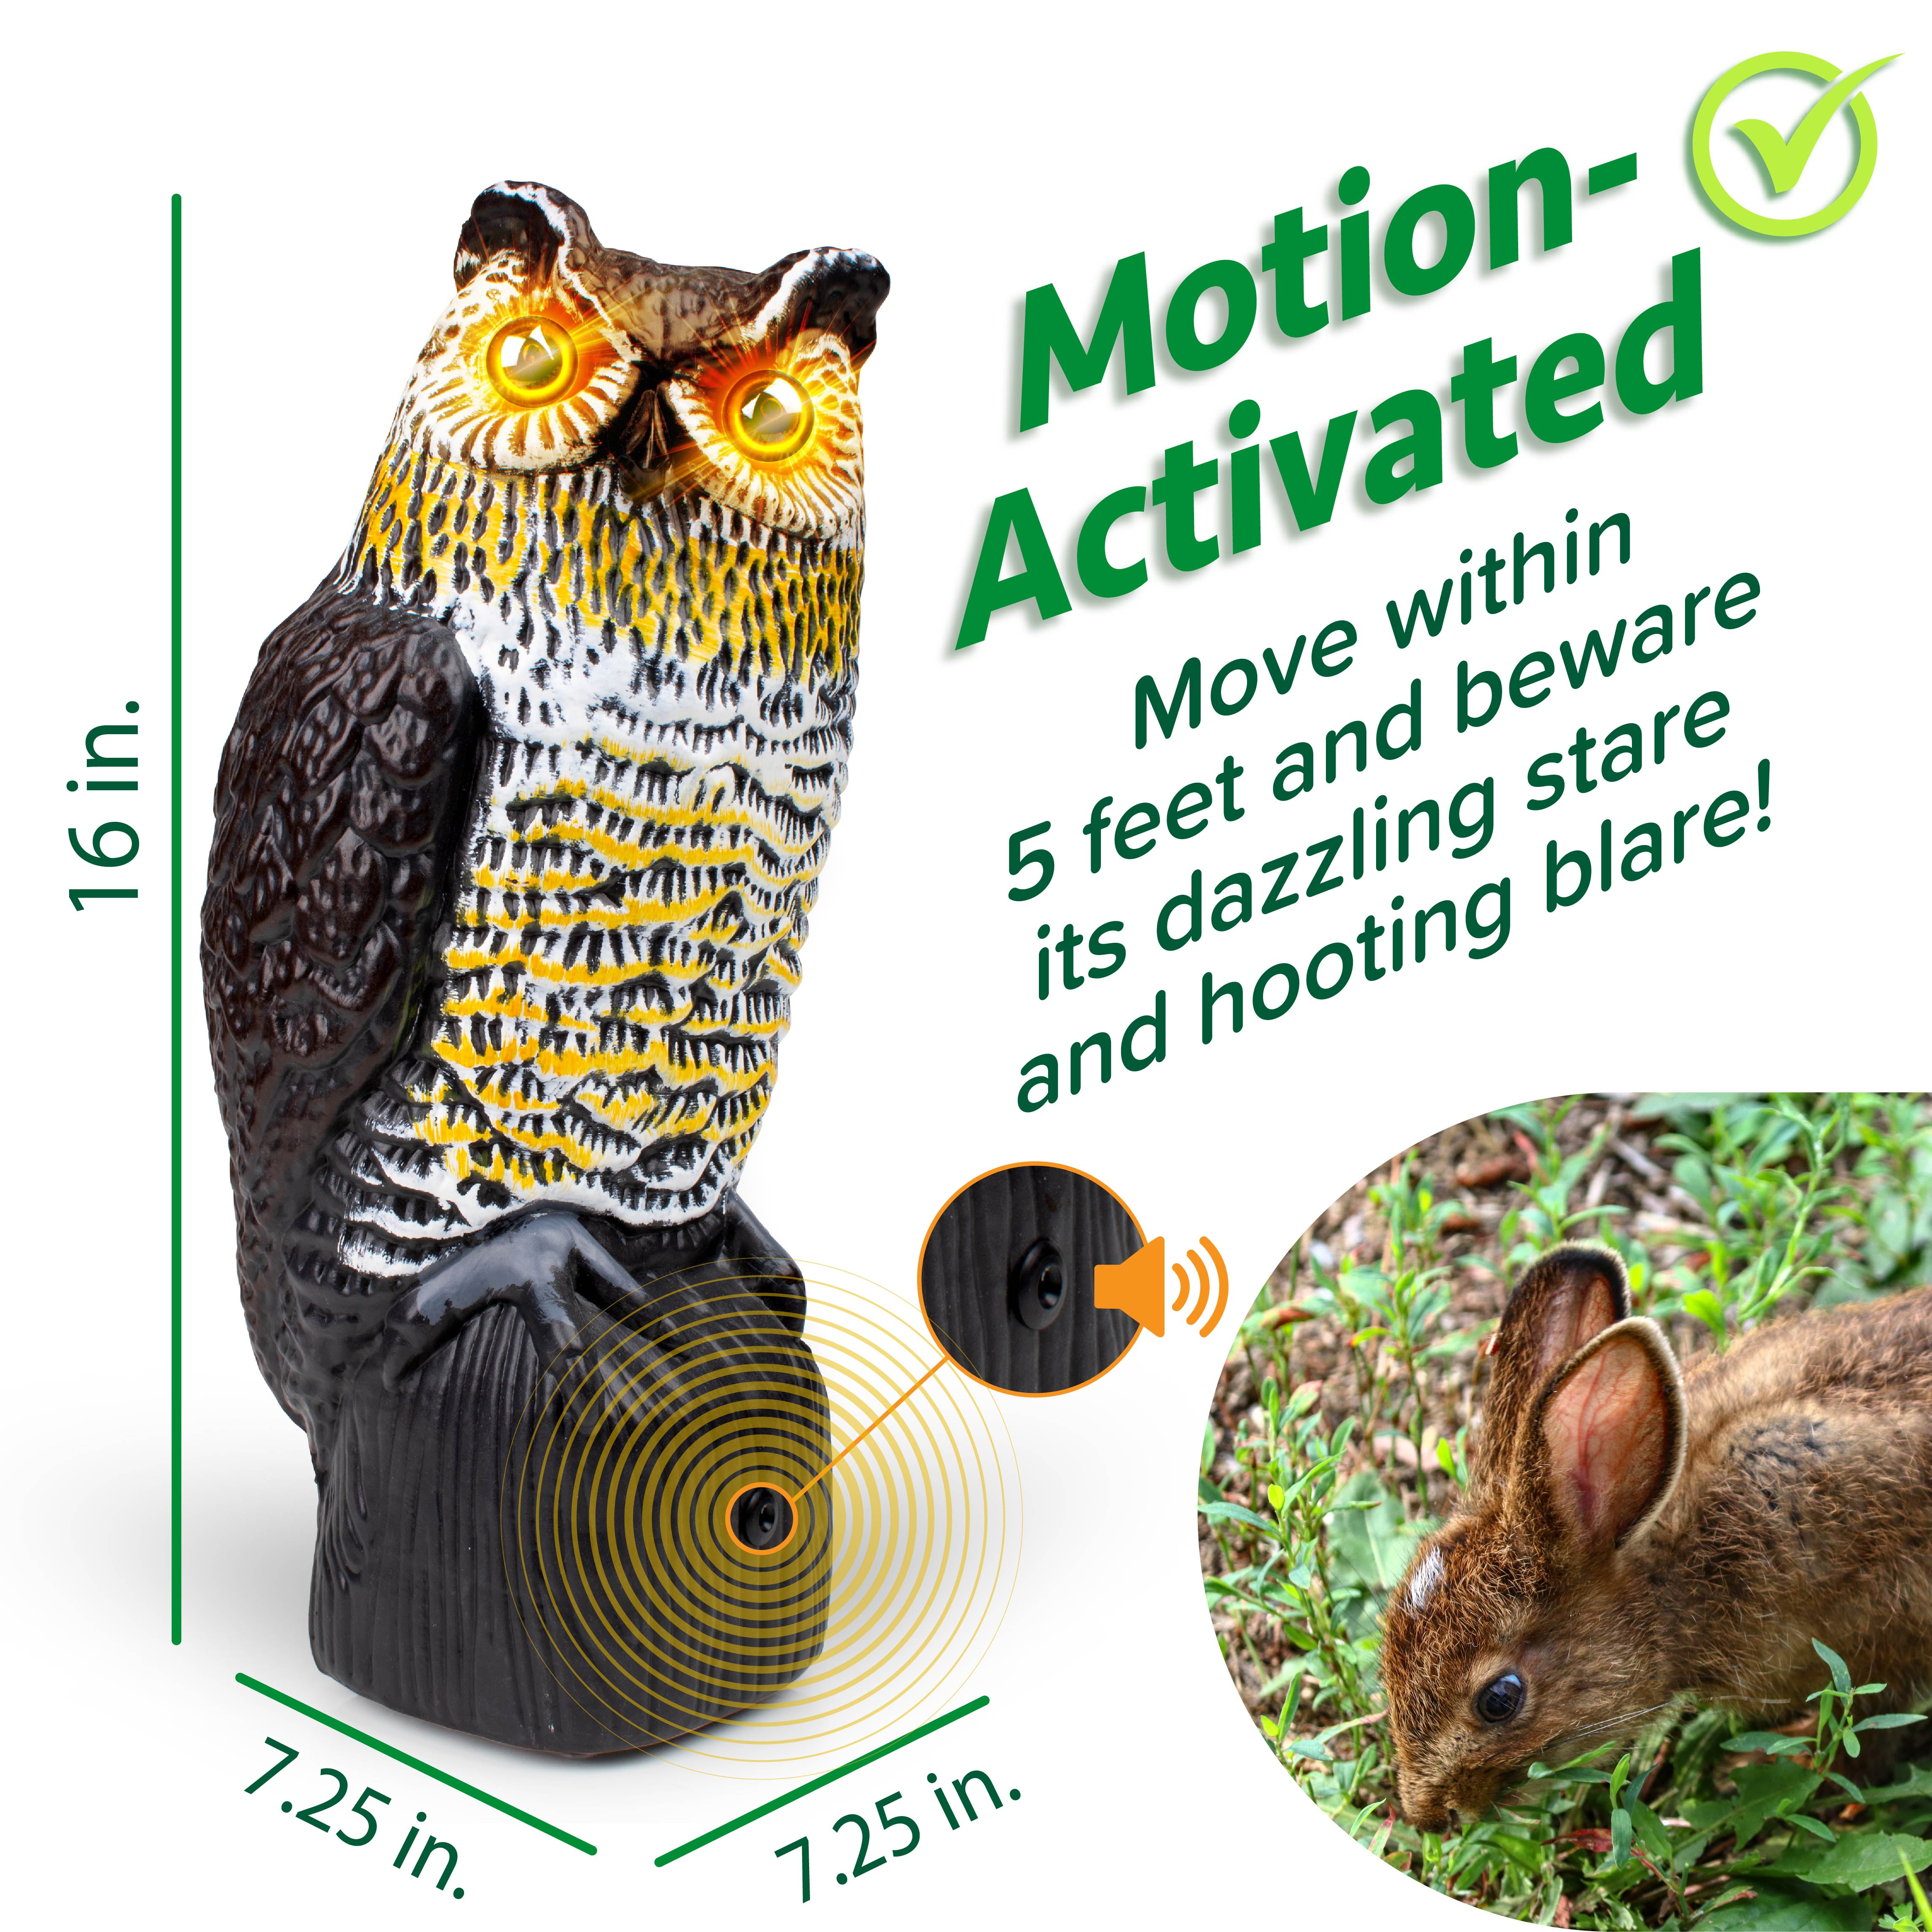 Deters Rodents Motion Activated Light & Sounds Hooting Owl Yard Statue 